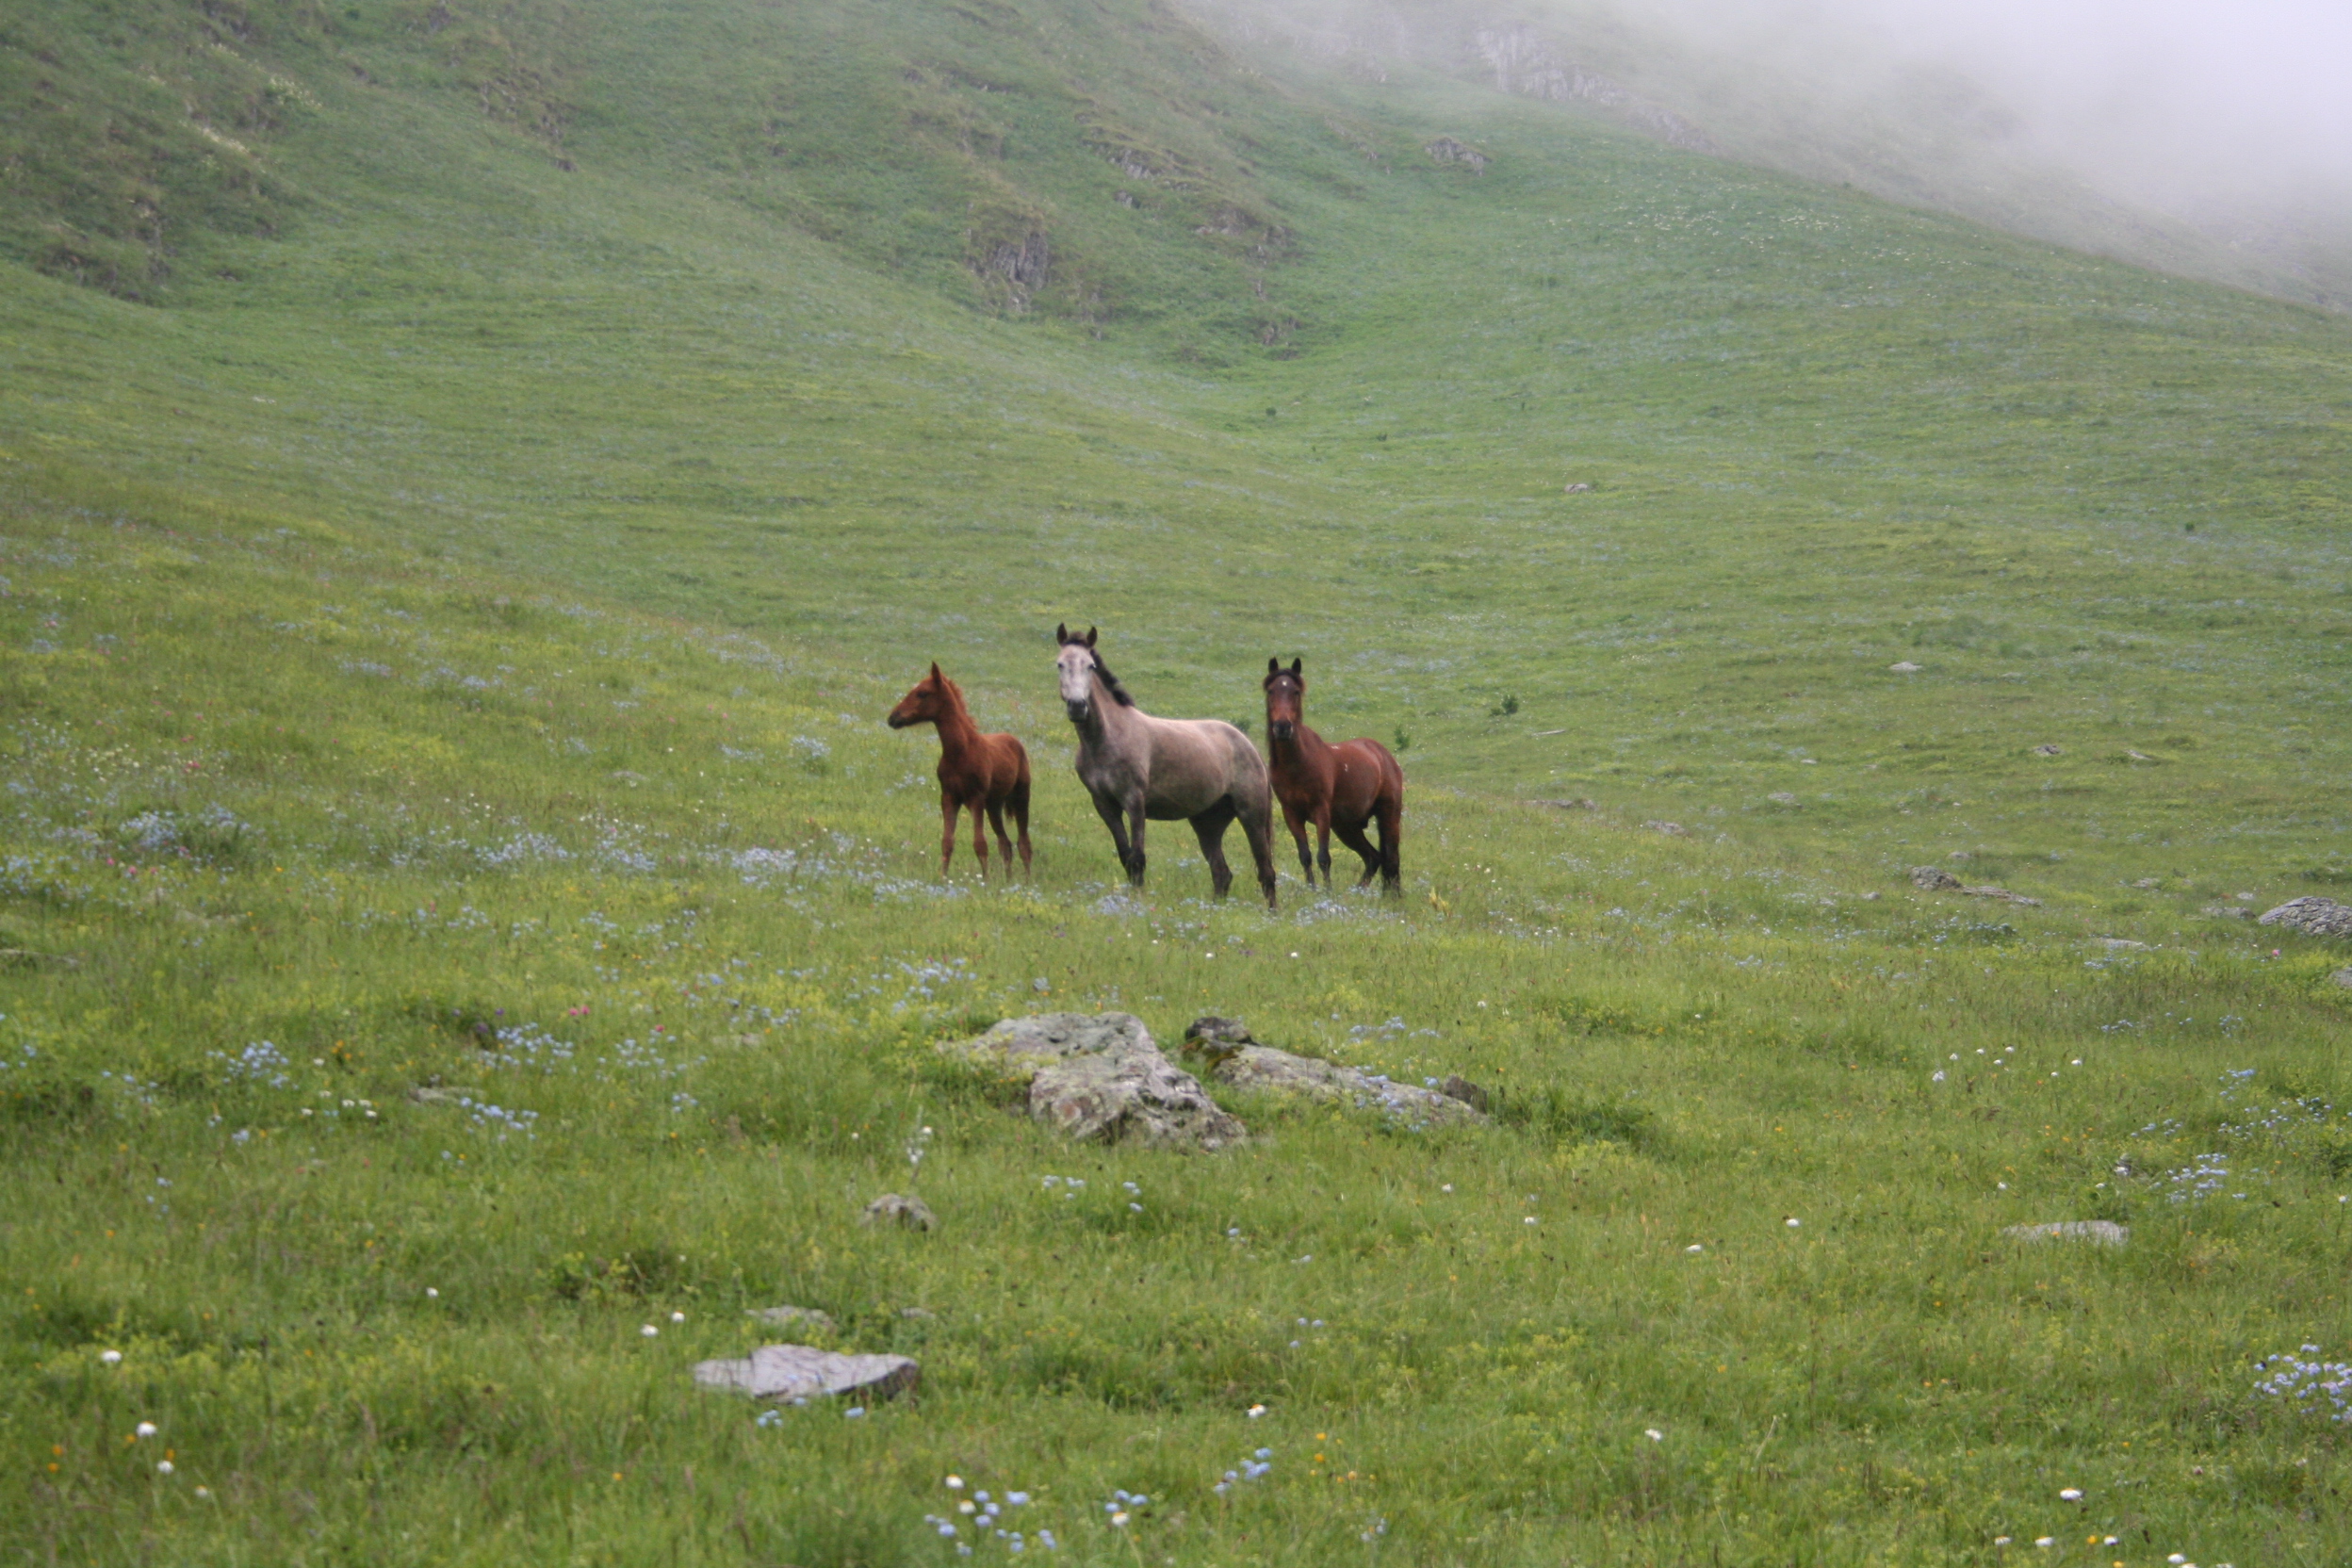 File:Horses in the field (1).jpg - Wikimedia Commons